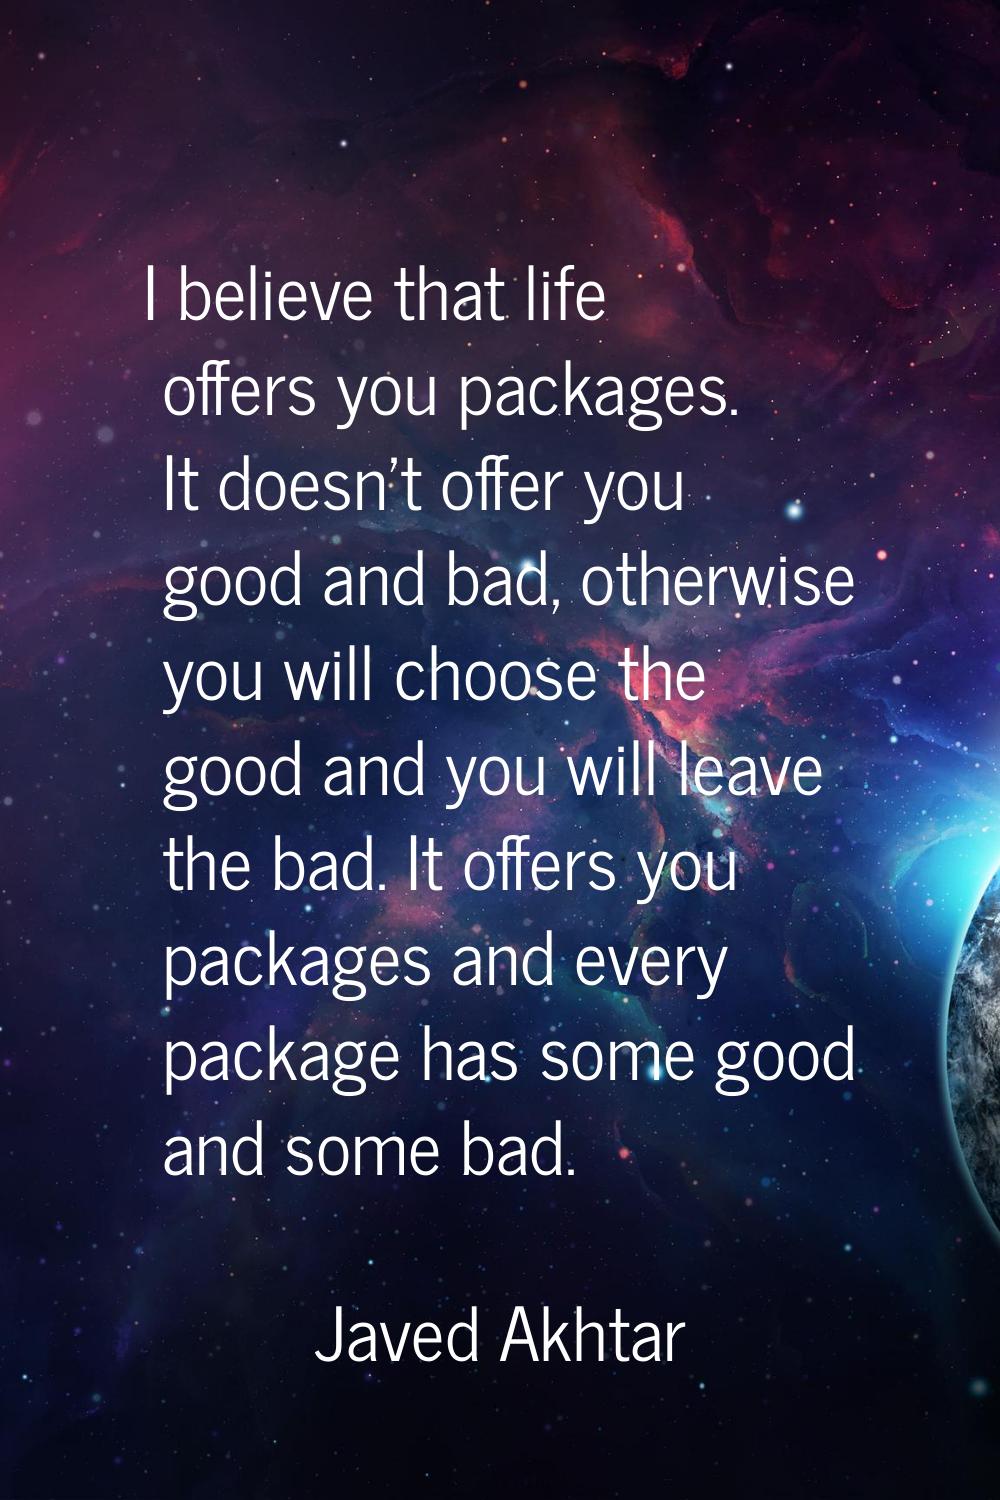 I believe that life offers you packages. It doesn't offer you good and bad, otherwise you will choo